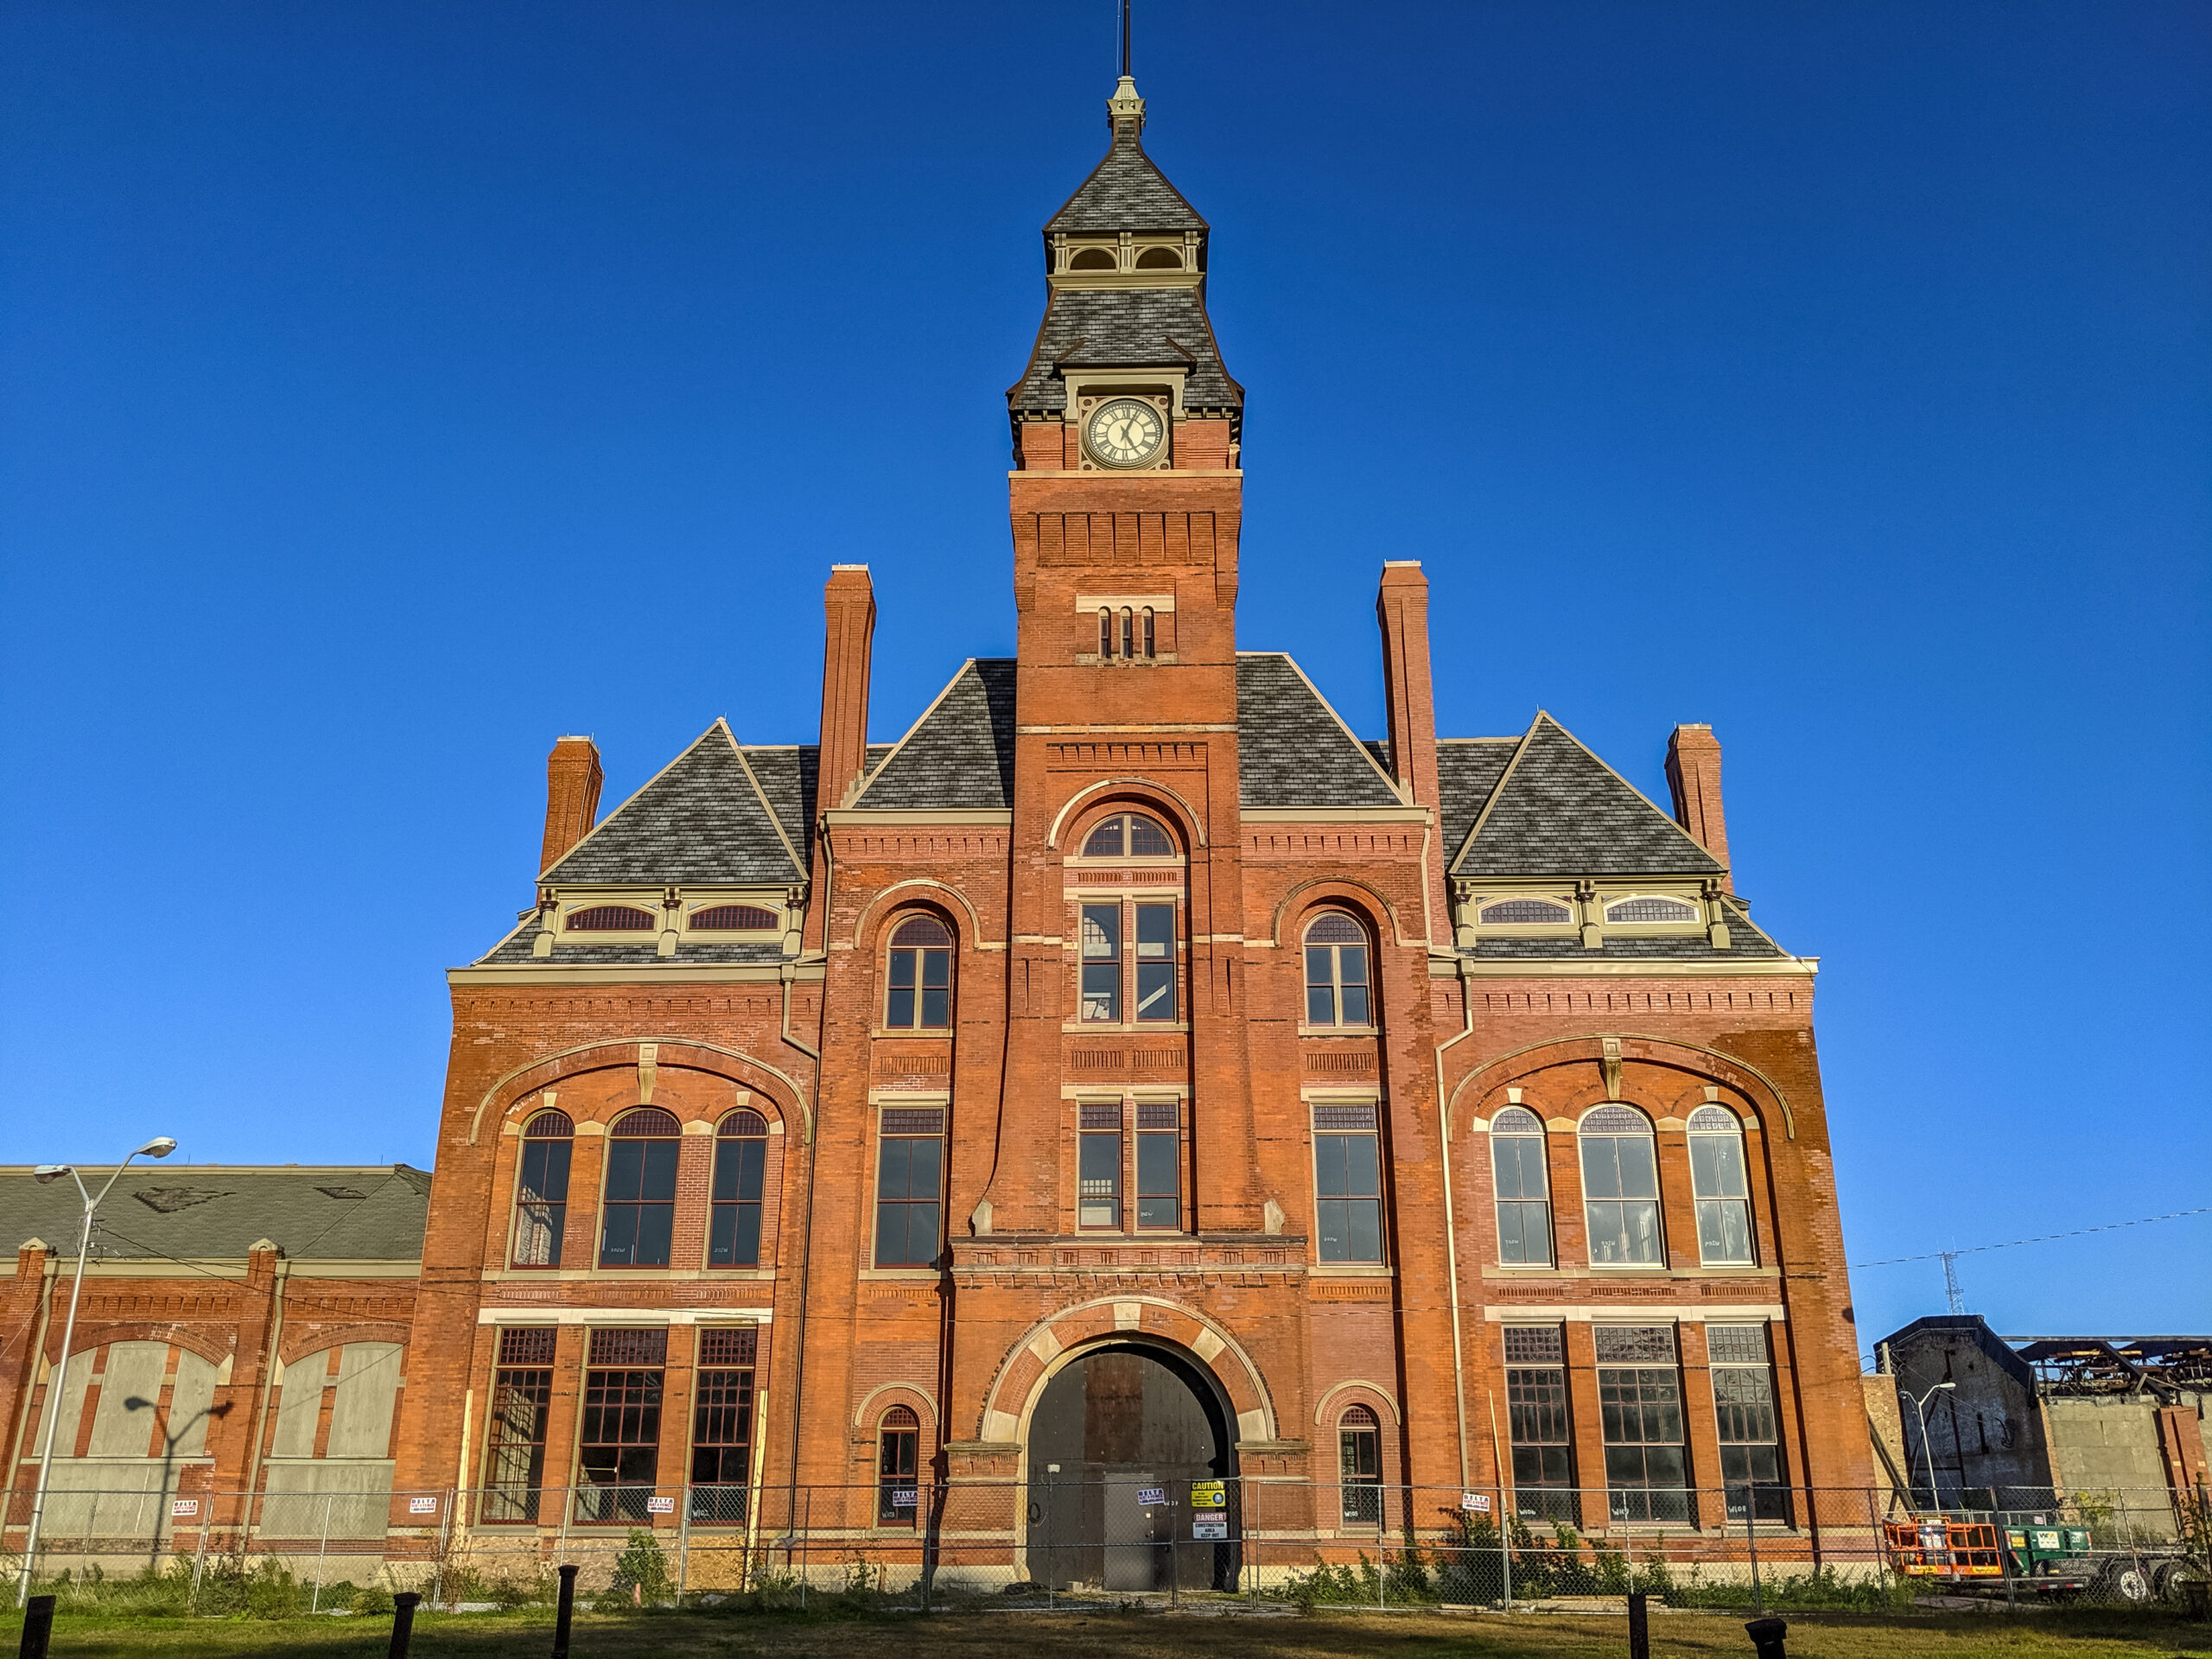 Ornate multistory brick building with clock tower